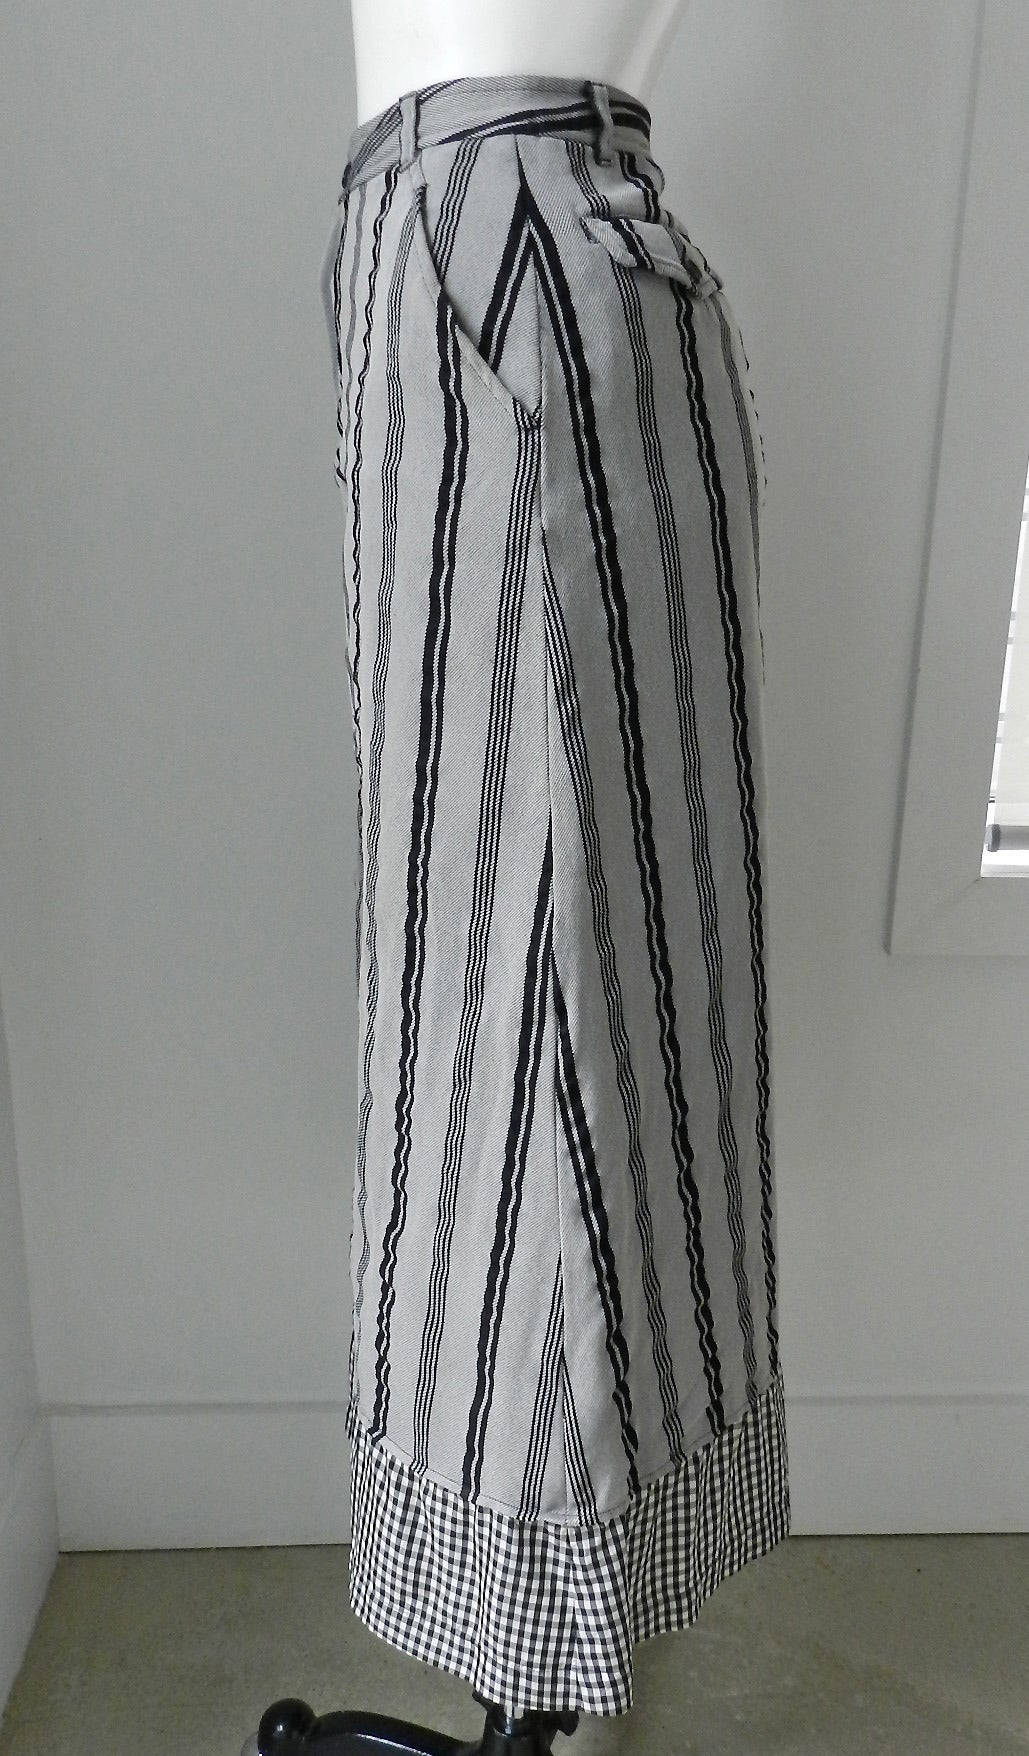 Vintage Comme des Garcons Vintage Grey Skirt with Black Stripes. Metal front zipper, gingham fabric insert. Tagged size M. Measures 28